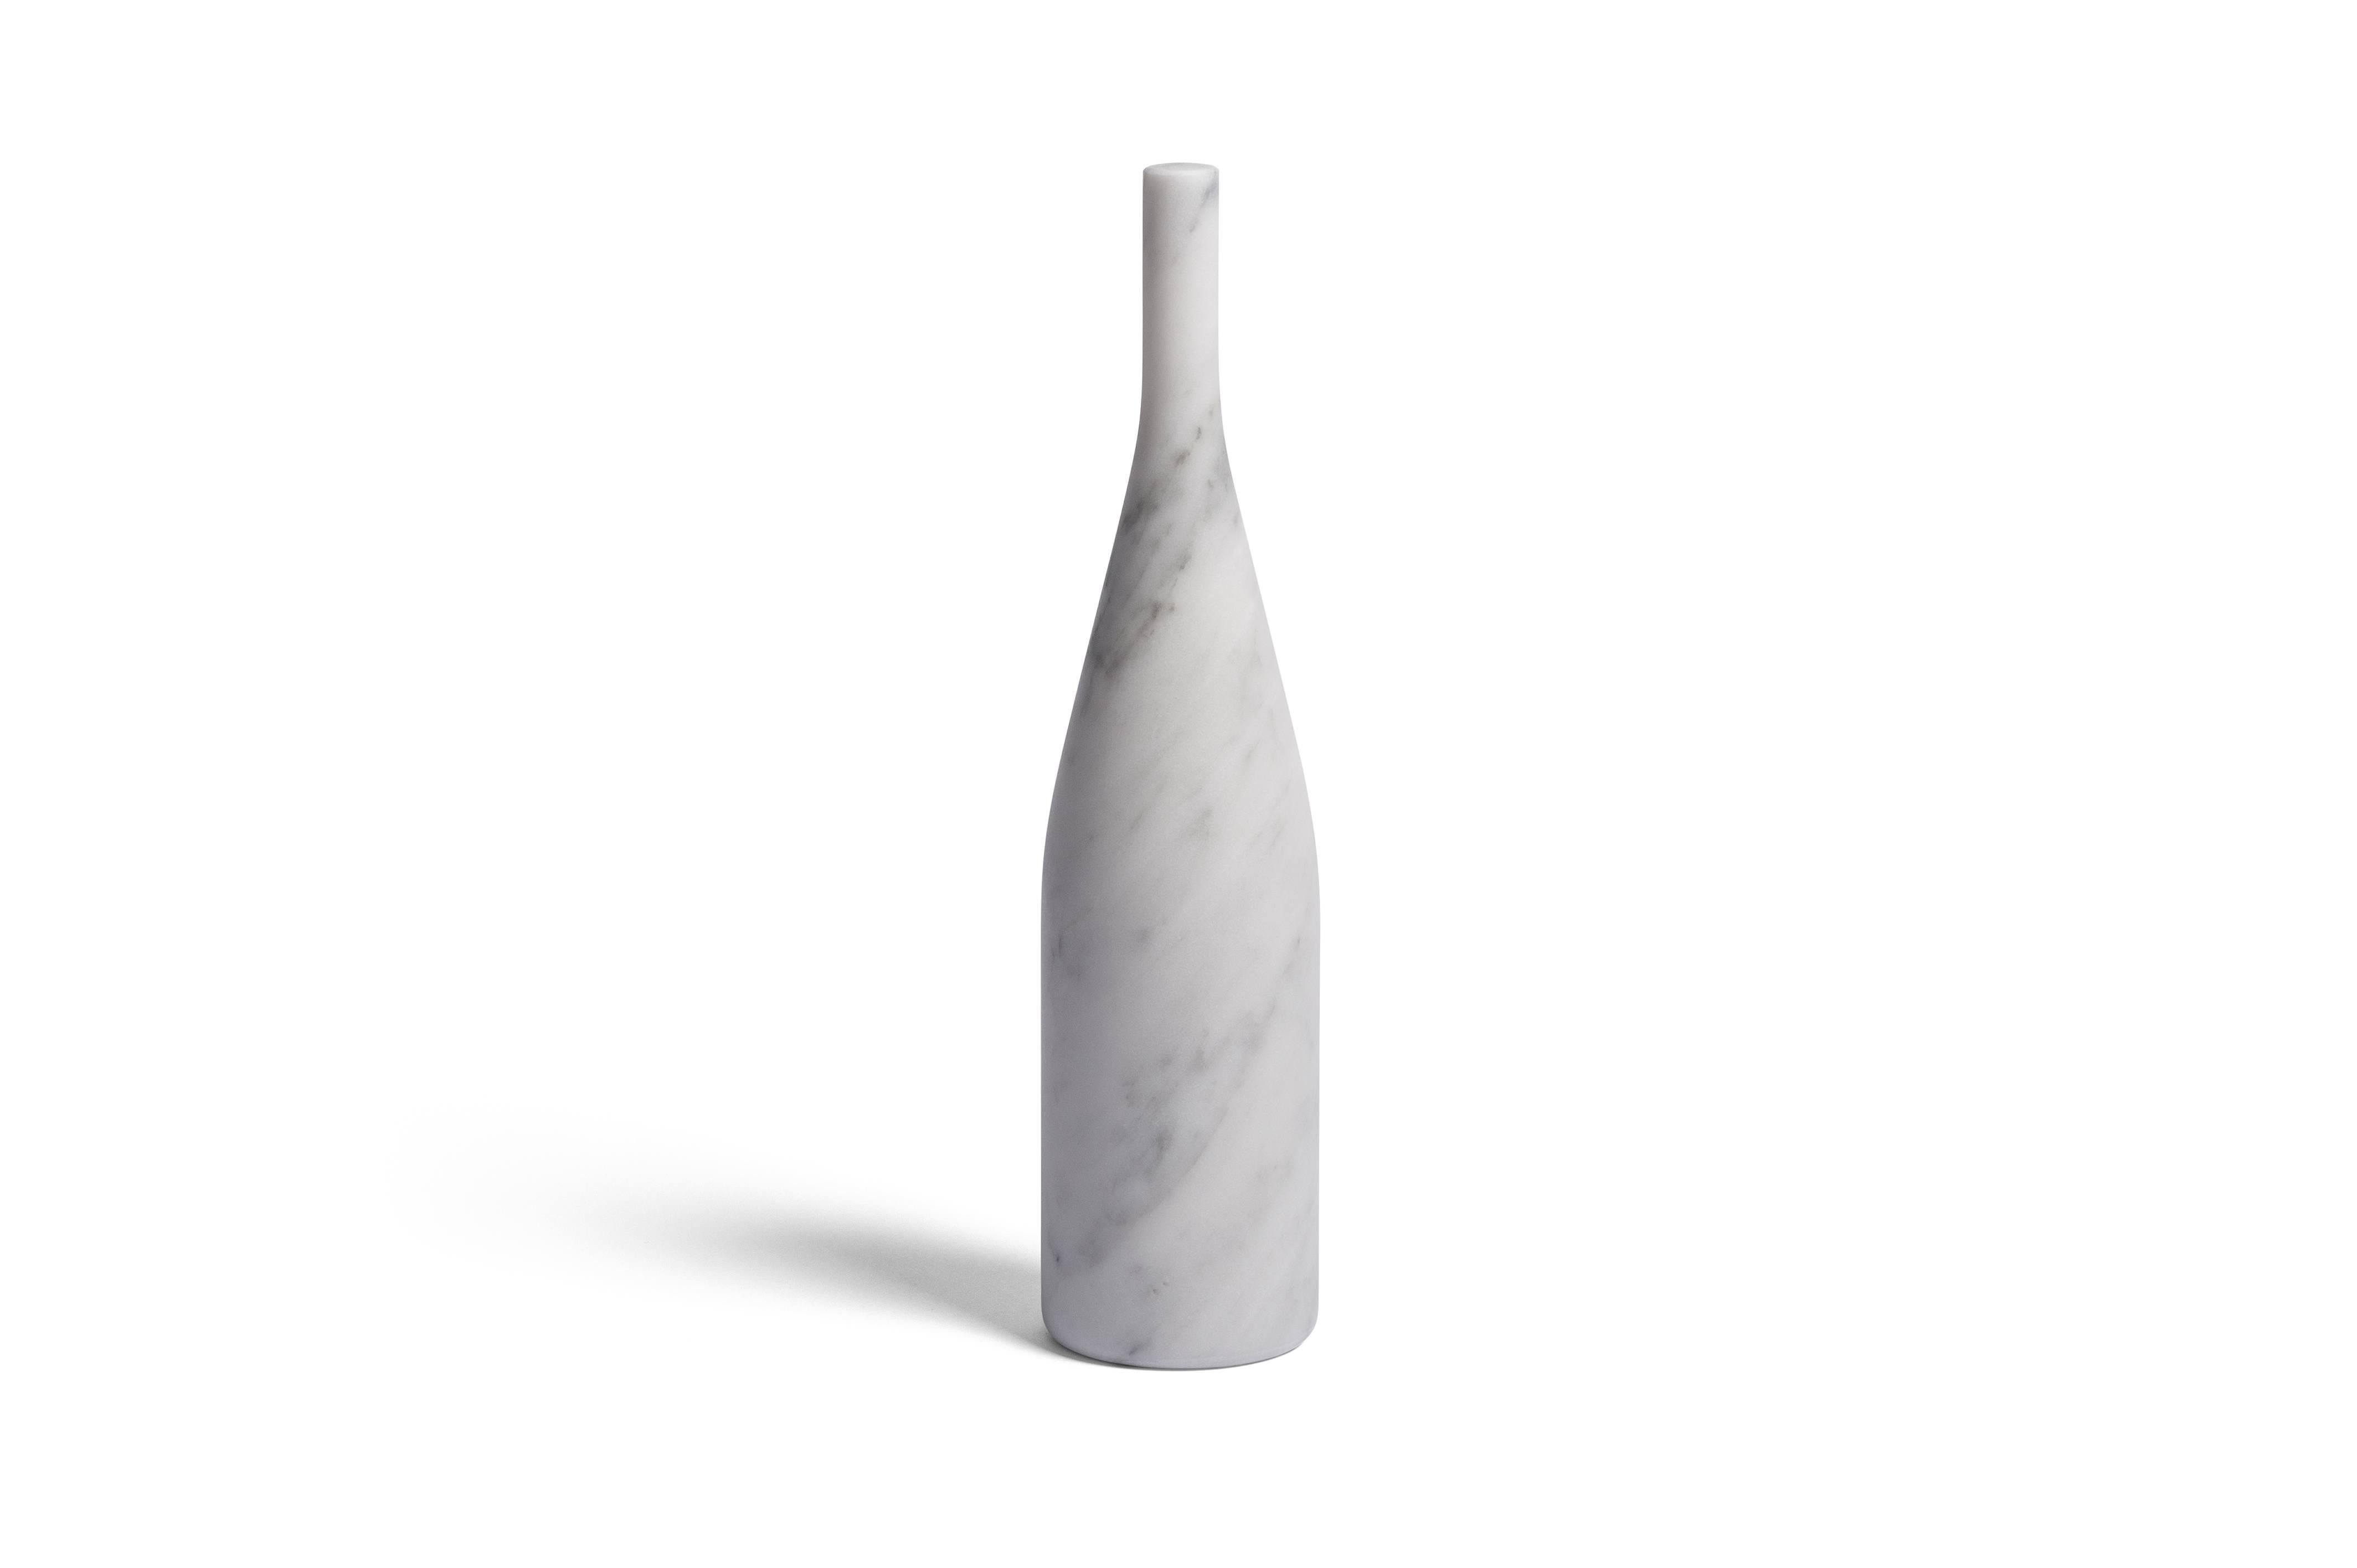 Inspired by the array of different types of stone she encountered working with Salvatori, designer Elisa Ossino has drawn upon the simplicity of form of Morandi’s still life images, reproducing them in stunning marble. From the Classic elegance of